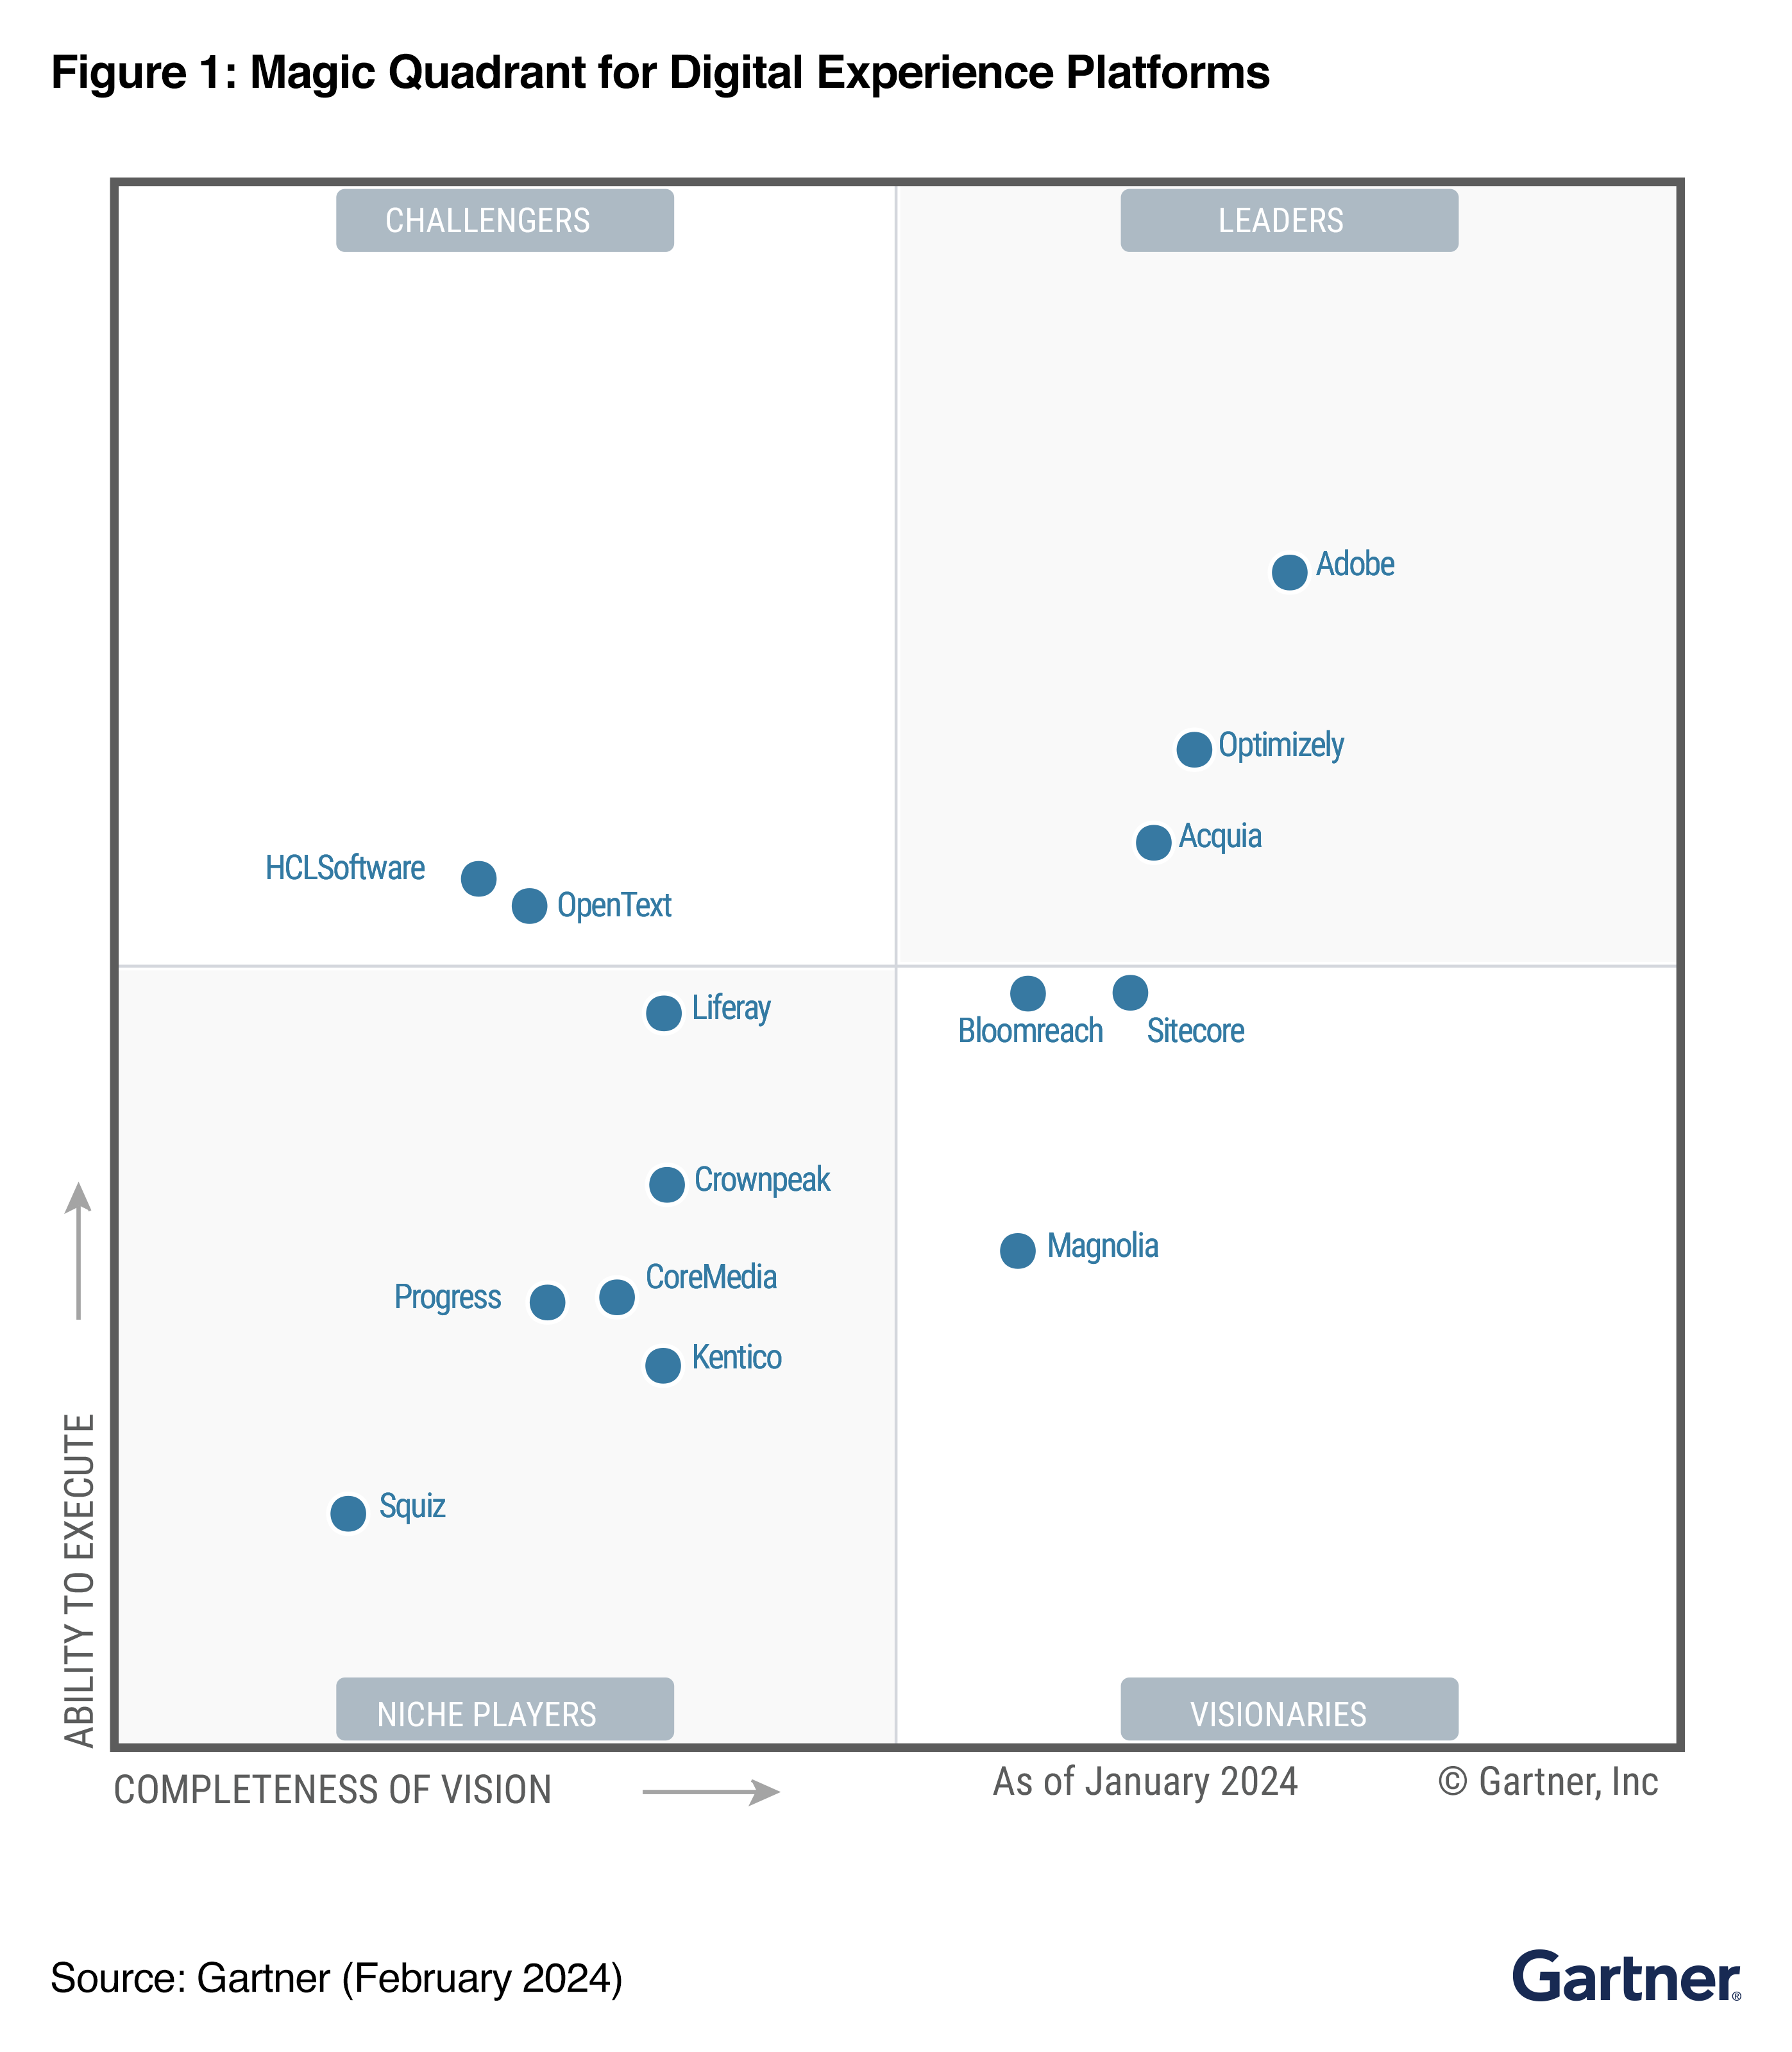 A graph showing the state of the Digital Experience Platforms in 2024. Vendors are plotted on a grid based on their ability to execute and completeness of vision. Acquia is placed in the 'Leaders' quadrant, indicating strong performance in both vision and execution.